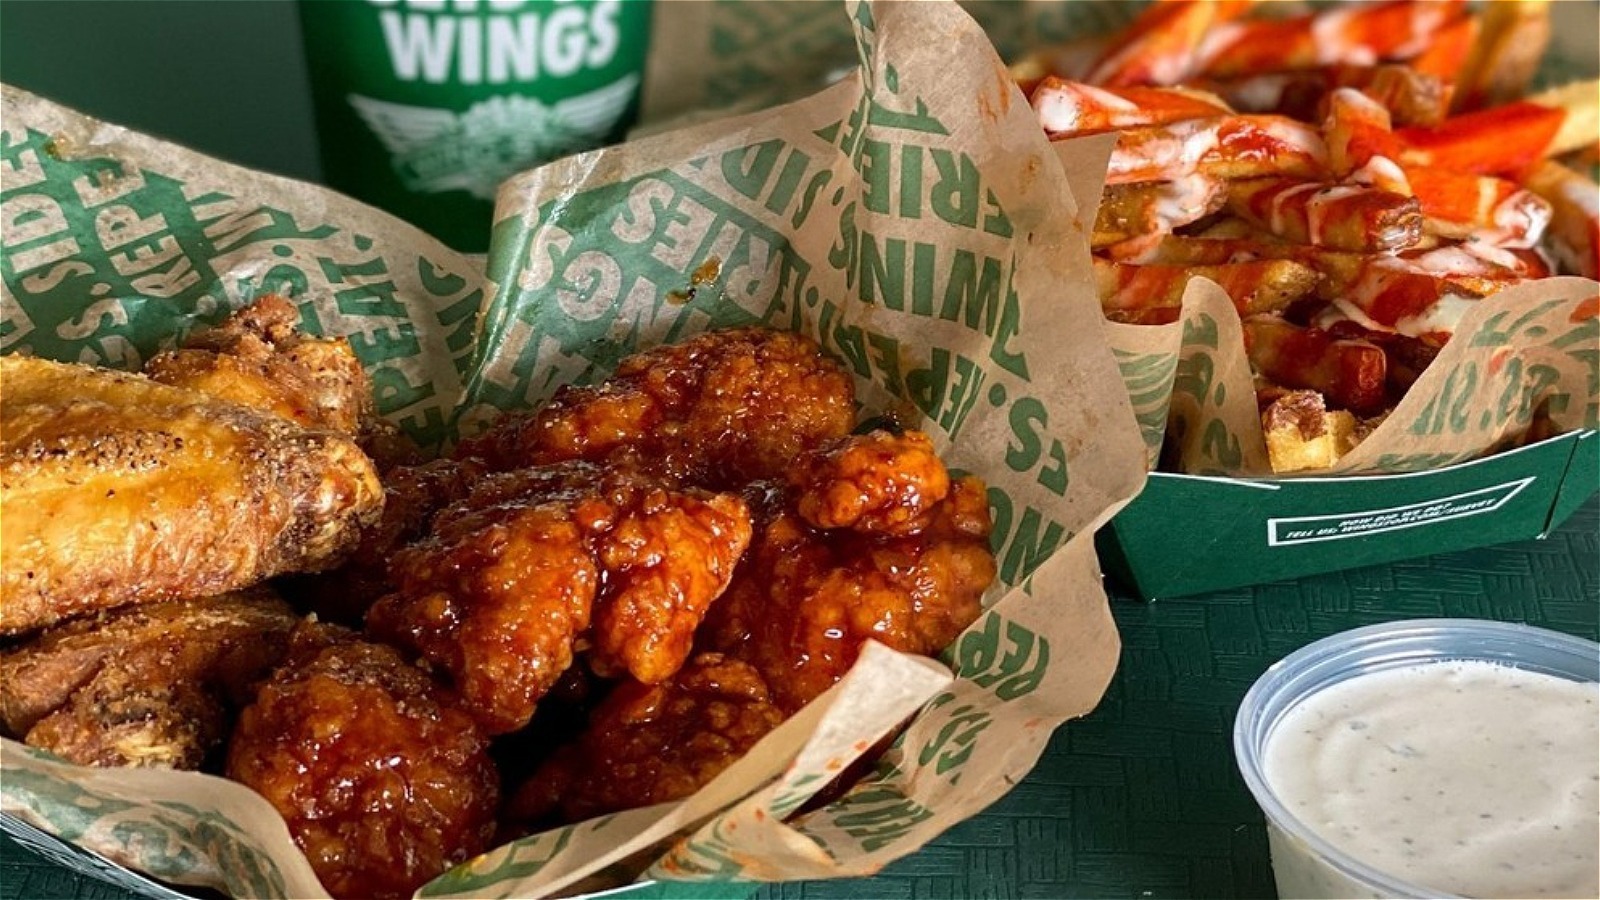 Wingstop Dropped A Carolina Gold BBQ Flavor For A Limited Time